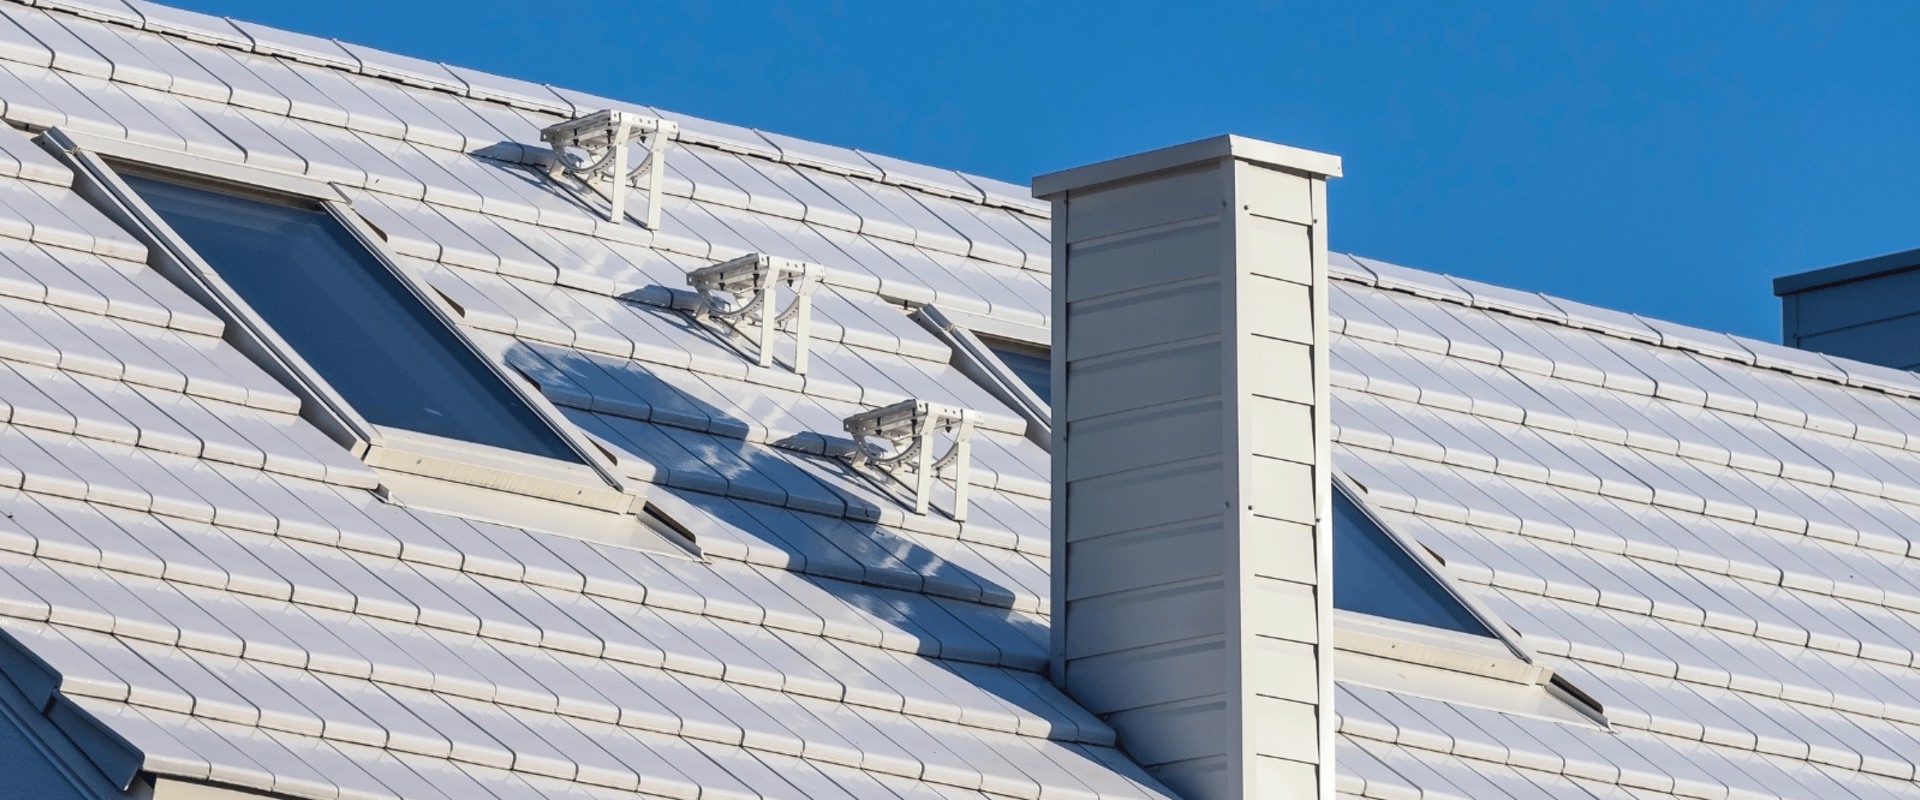 Reflective Roofing Materials: Making Your Home More Eco-Friendly and Energy-Efficient